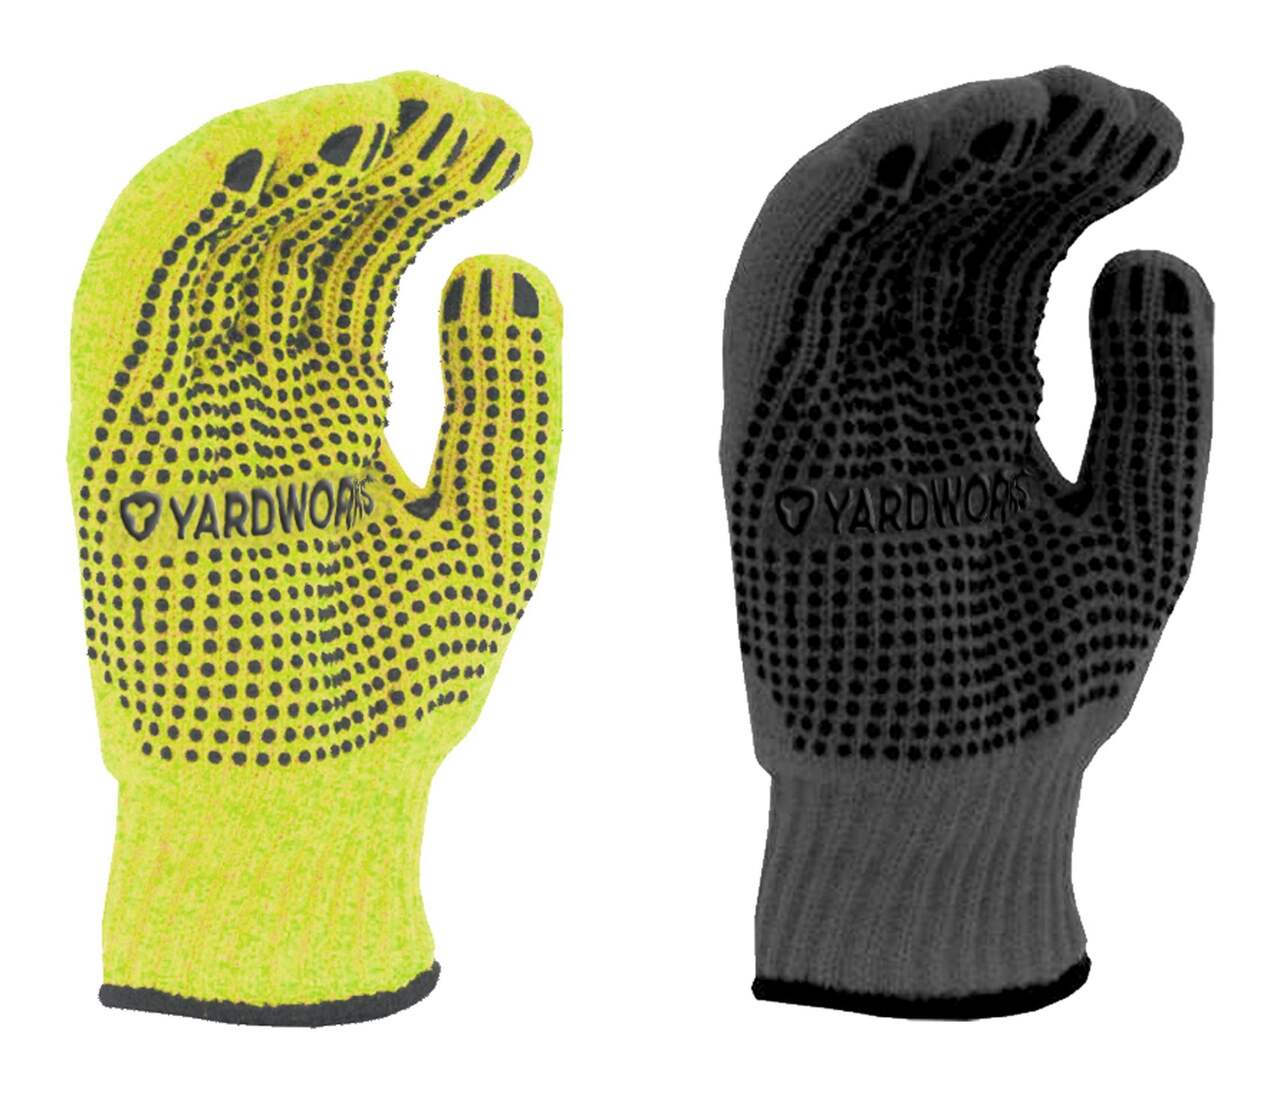 Yardworks Knit Dotted Palm Lined Unisex Work Gloves, Large, Yellow